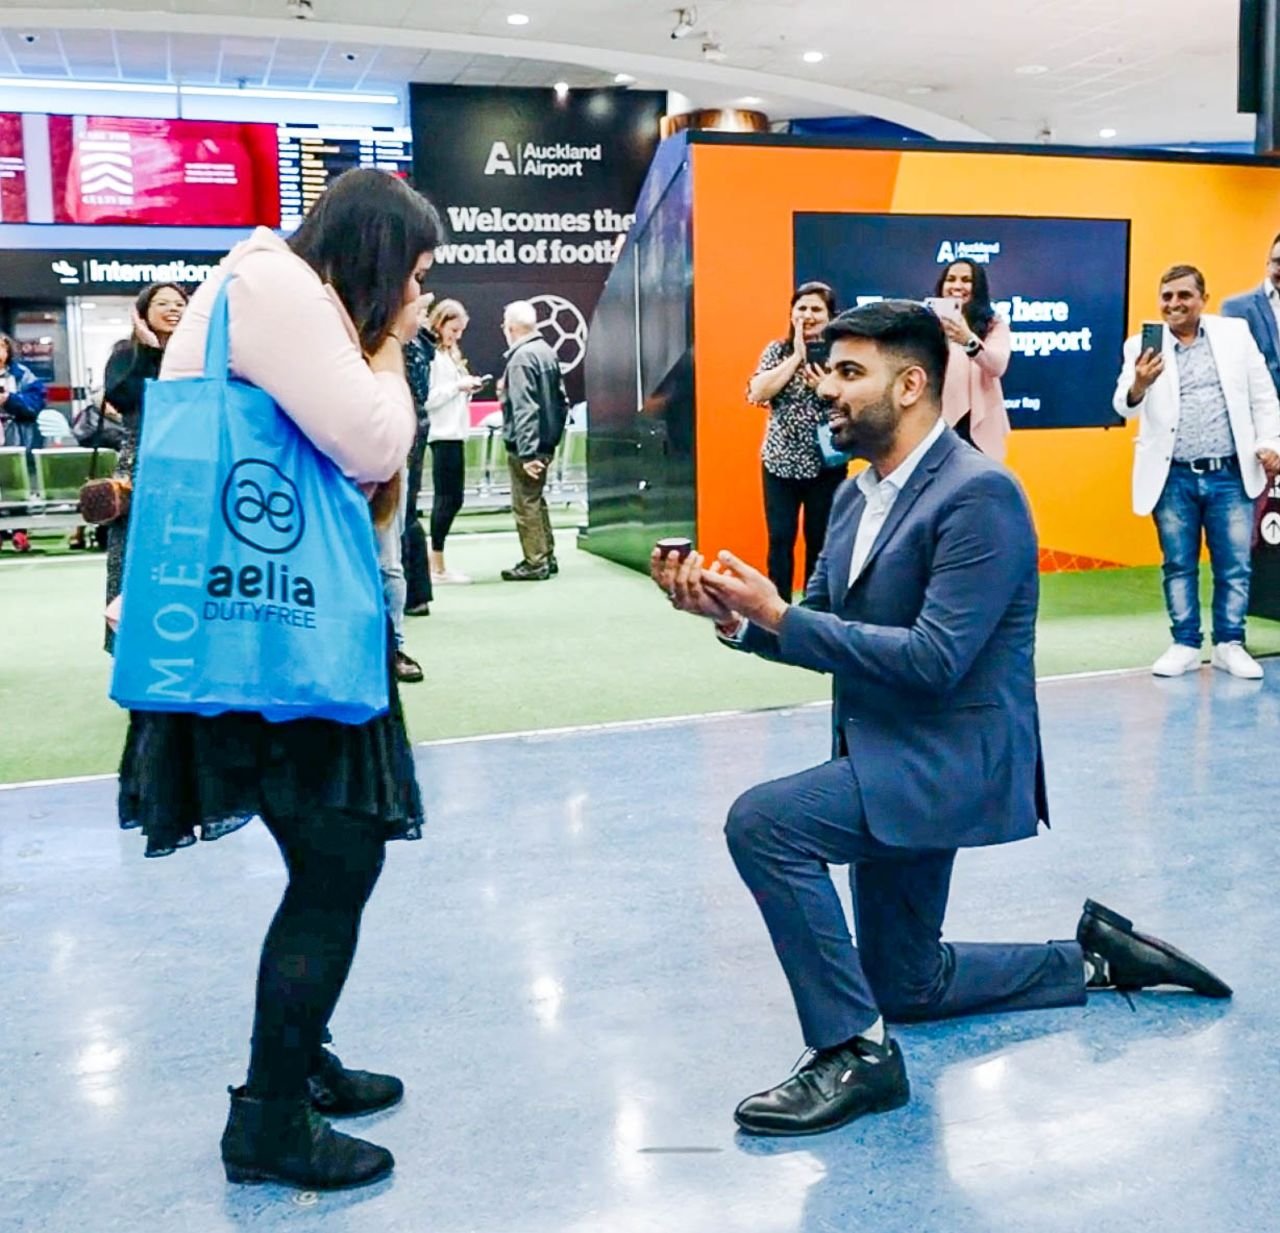 She heard her boyfriend’s voice on the airport PA system. Then came the proposal